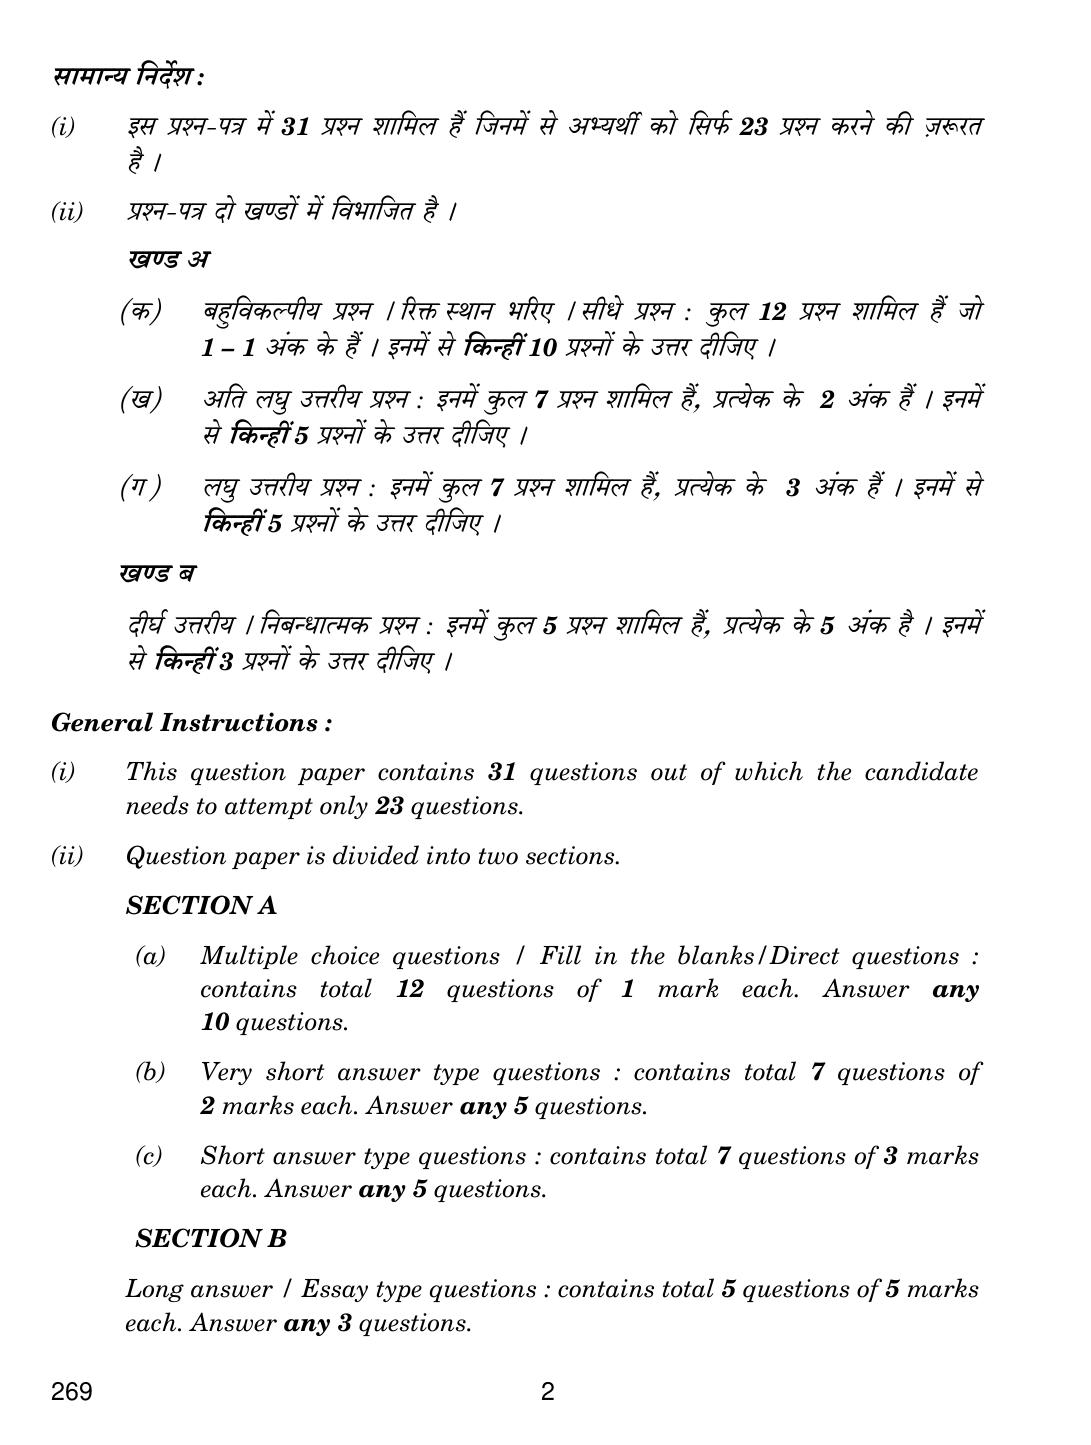 CBSE Class 12 269 Beauty And Hair 2019 Question Paper - Page 2